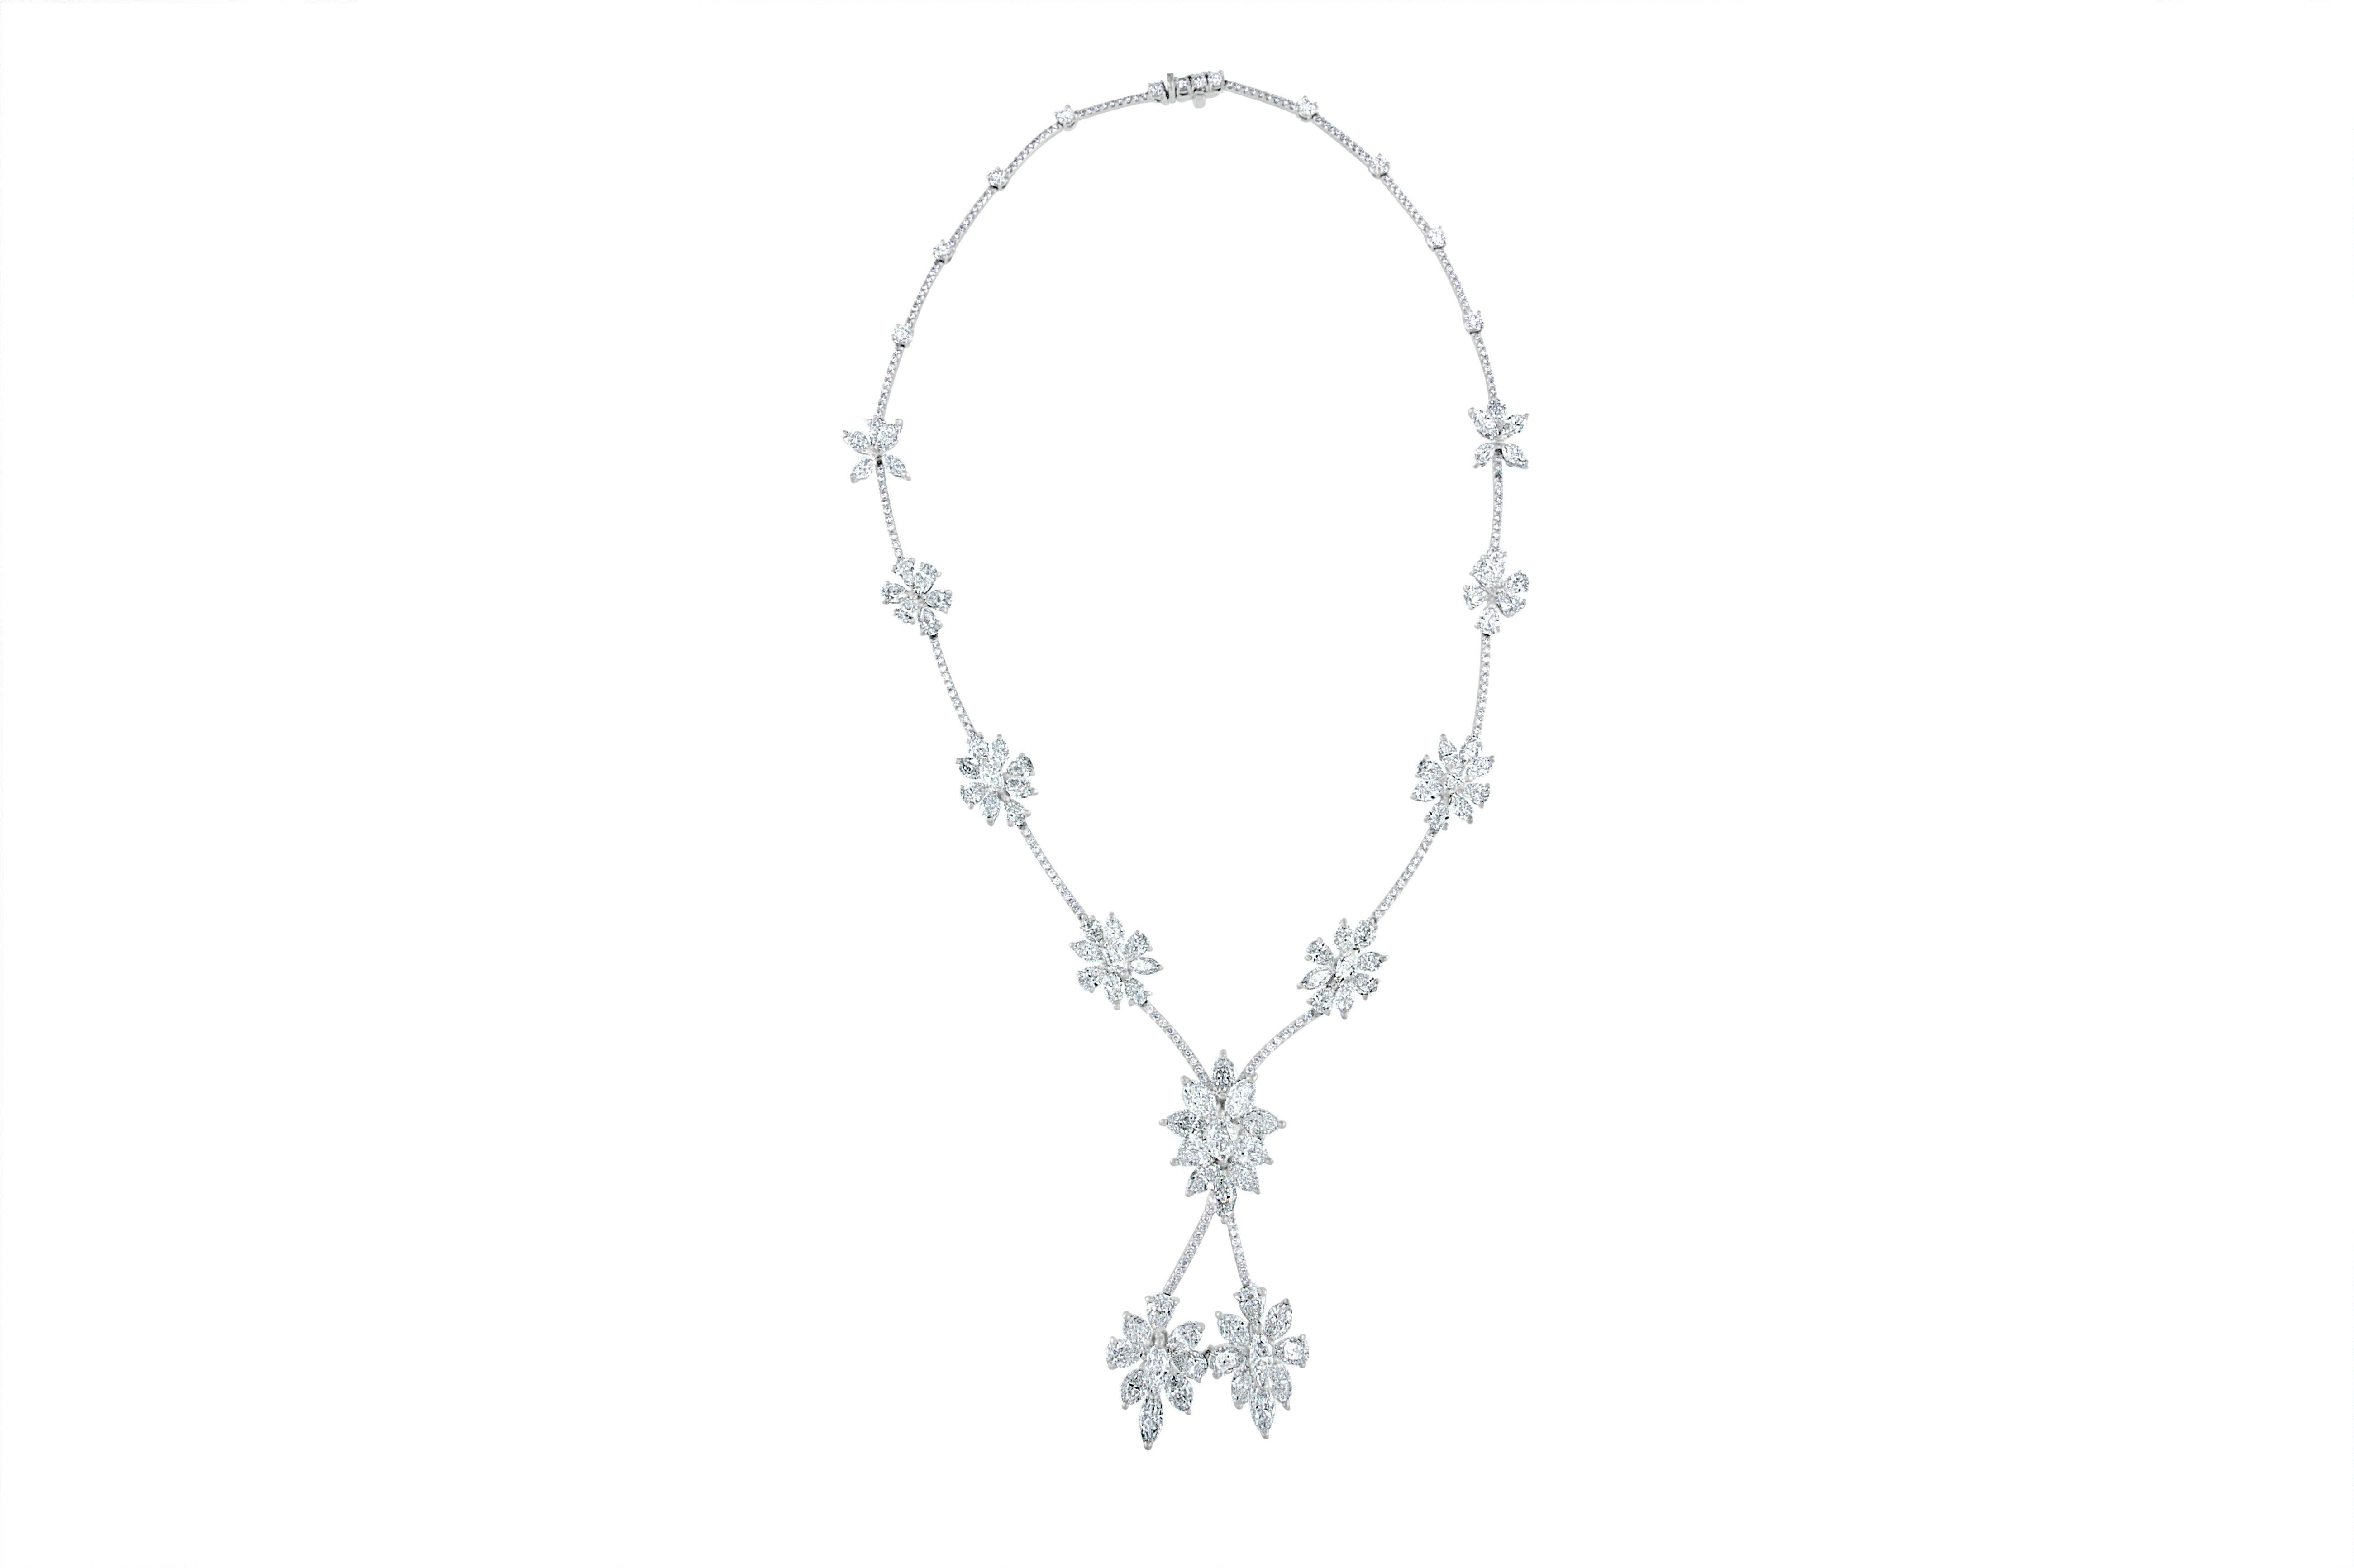 This exquisite diamond necklace was recently handcrafted in the celebratory honor of Ahee Jewelers 70th anniversary. This one-of-kind platinum necklace is adorned with 34- pear shape diamonds weighing approximately 12.62 carats total, 53-marquise